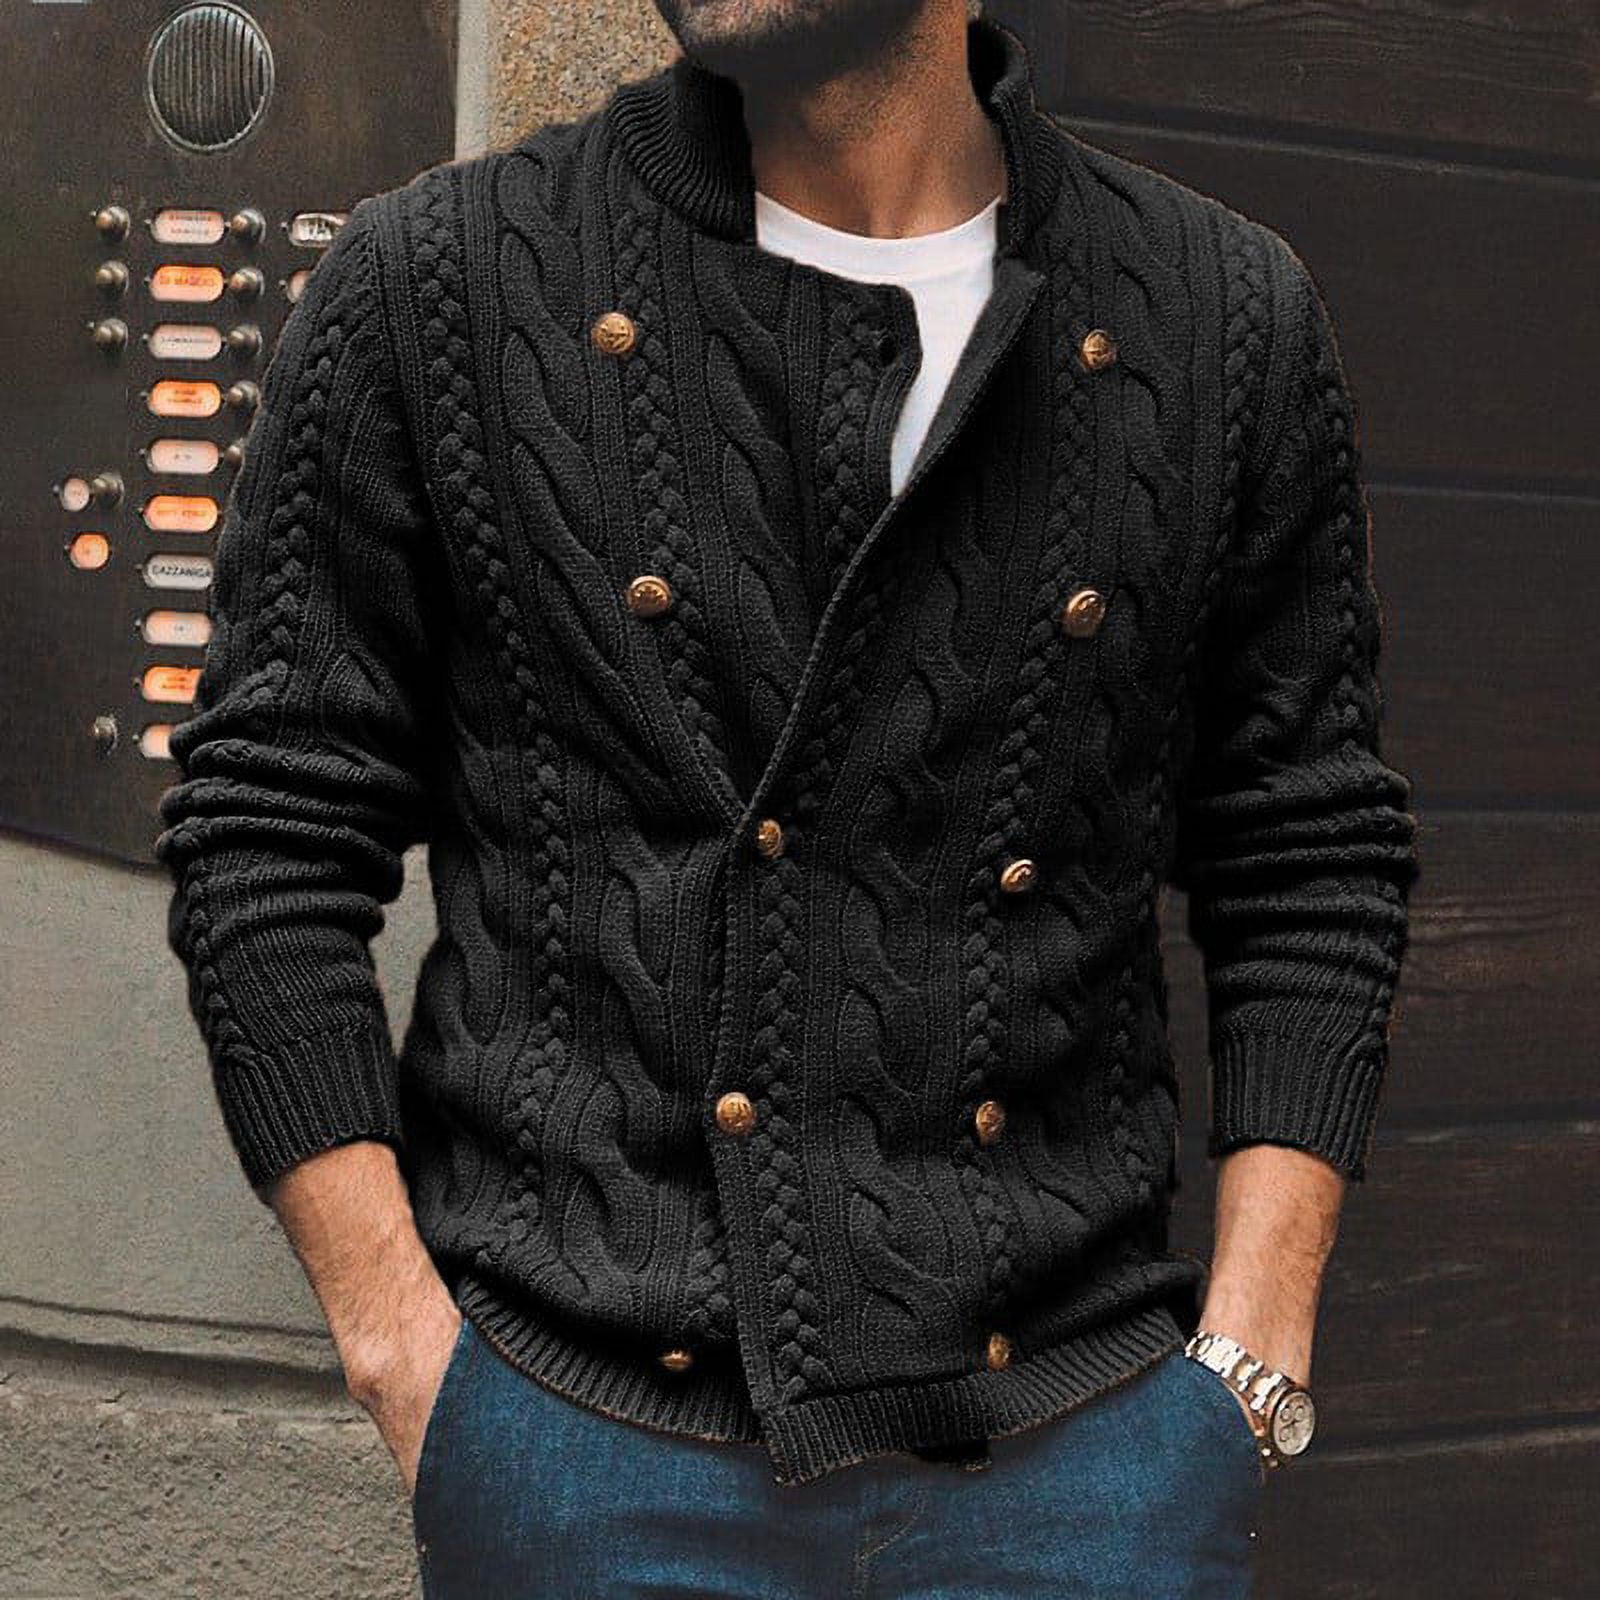 Men Turtleneck Double Breasted Sweater Jacket Warm Cardigan Cable